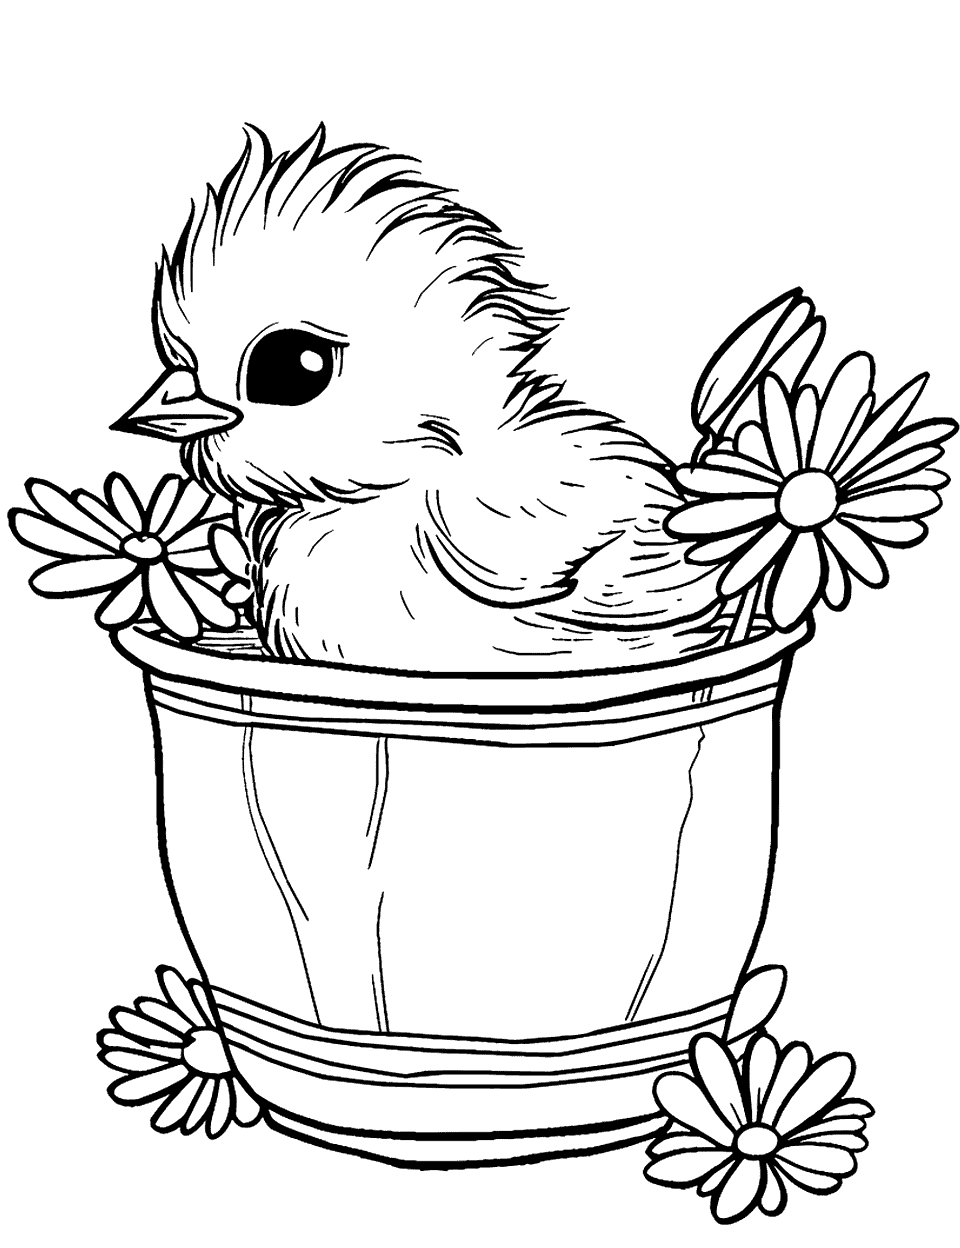 Chick Peeking from a Flower Pot Chicken Coloring Page - A shy chick peeking out from within a large flower pot.